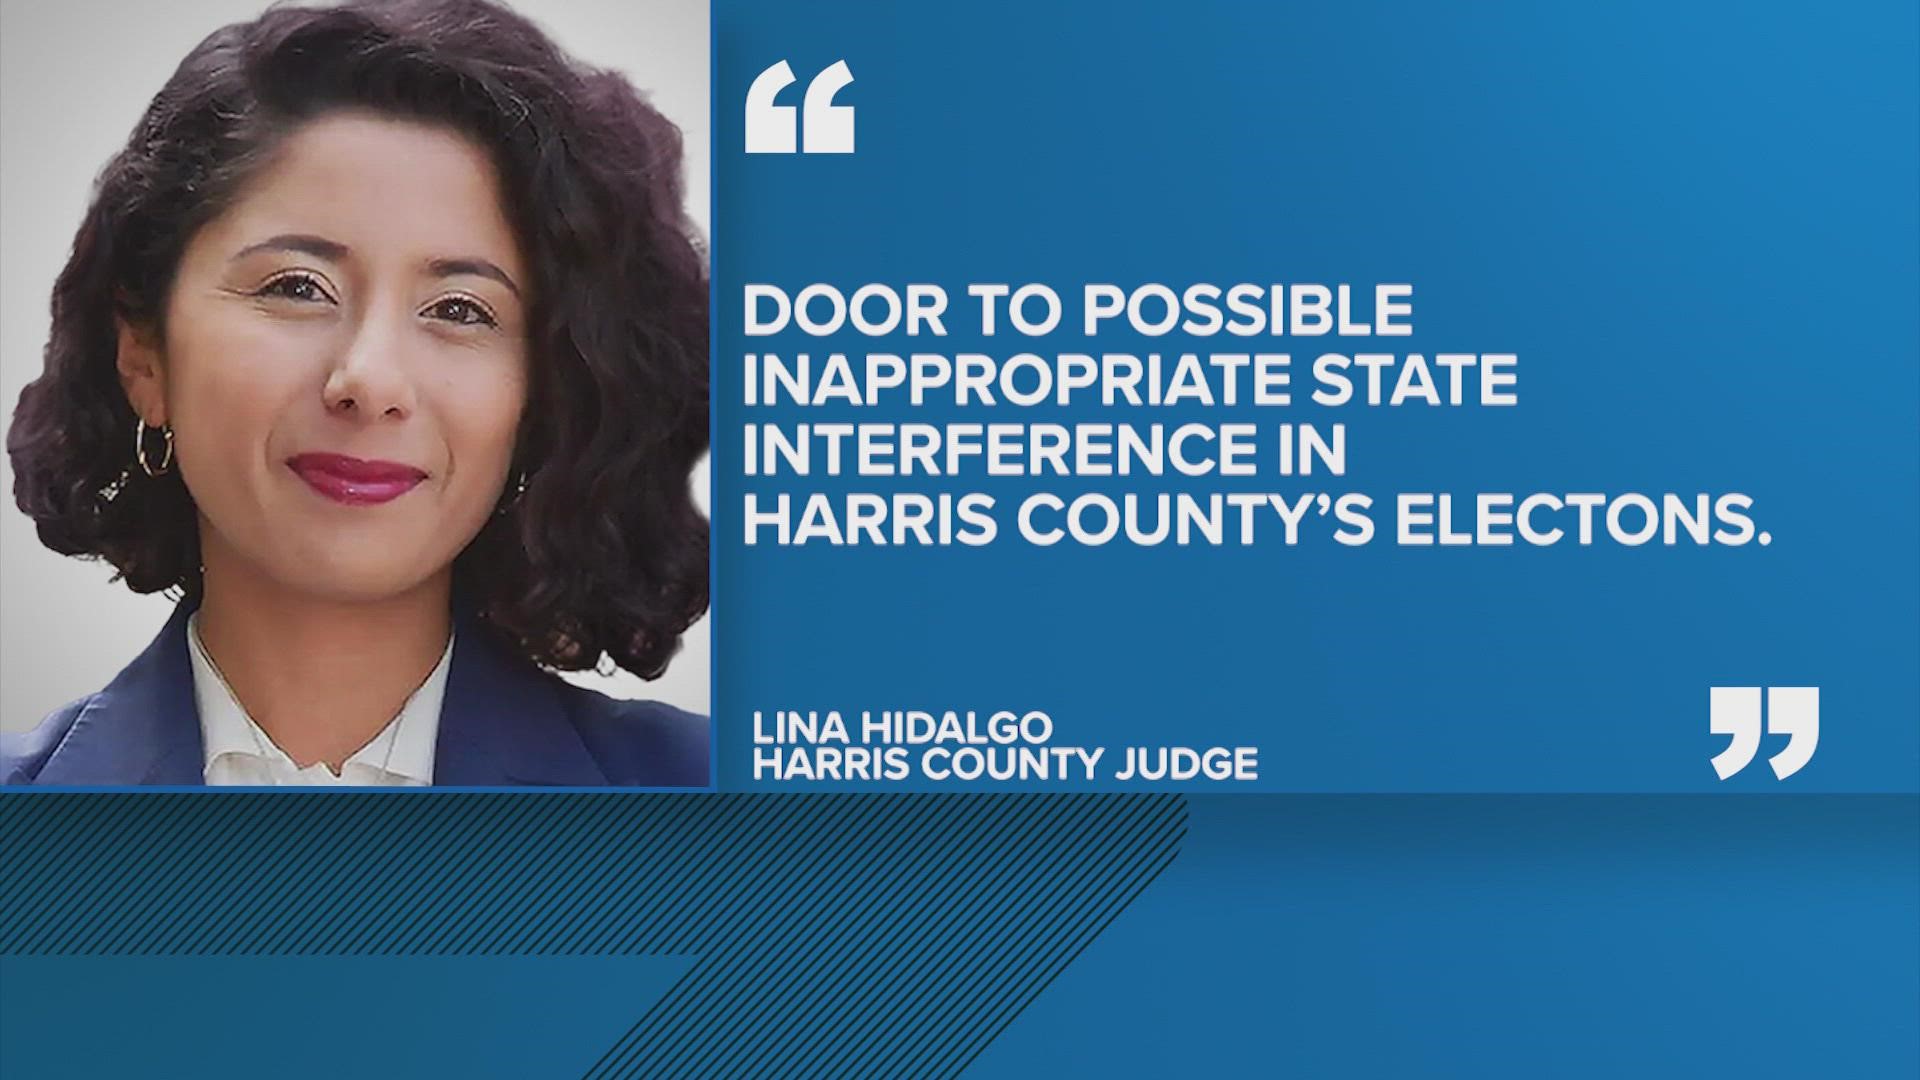 Harris County Judge Lina Hidalgo said the State sent the letter "potentially in an attempt to sabotage county efforts."